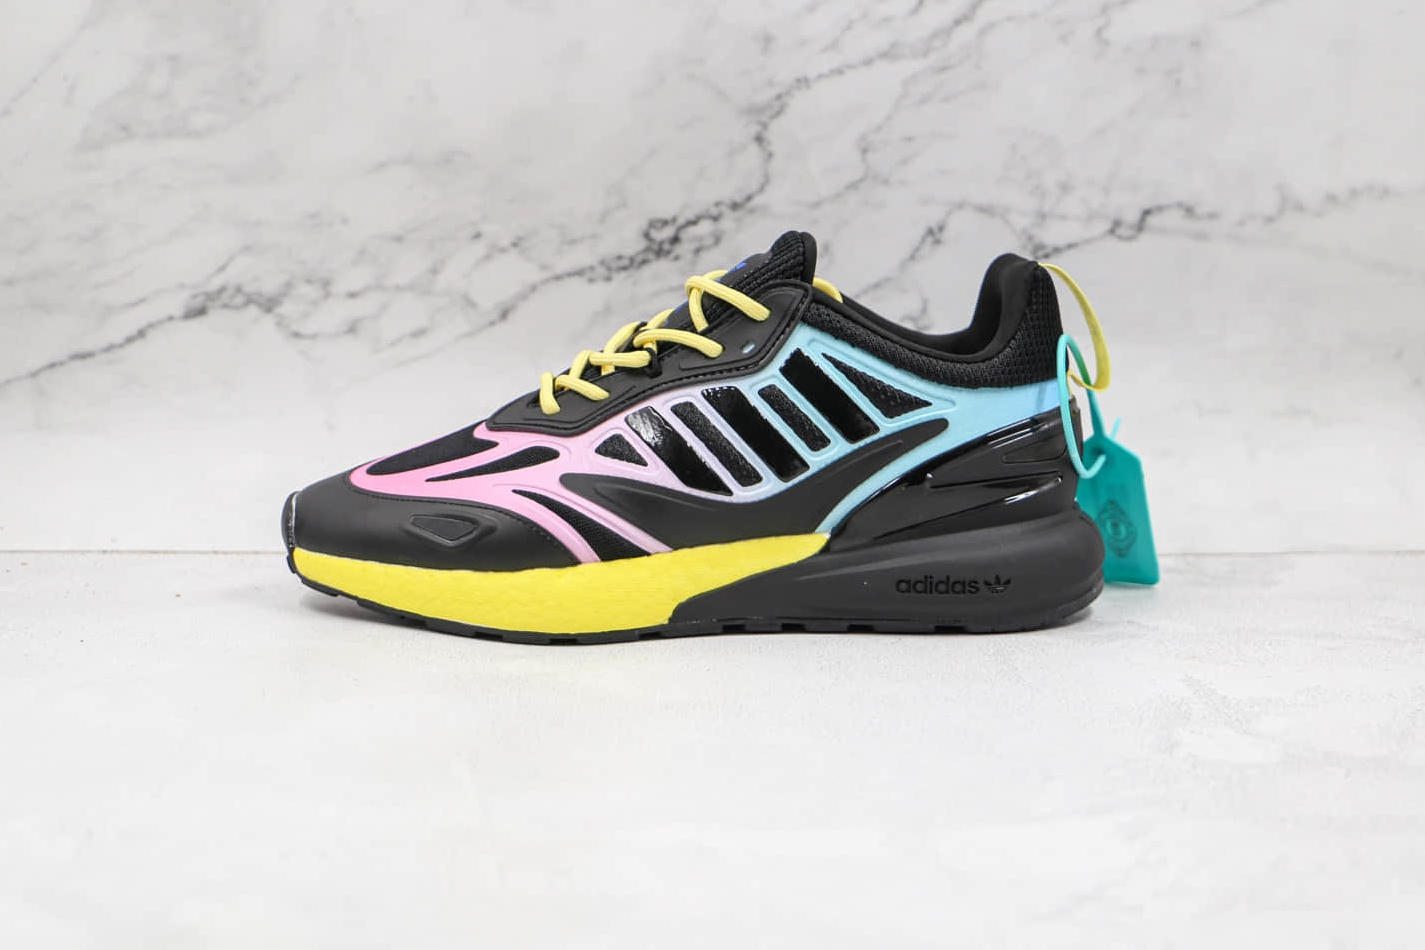 Adidas ZX 2K Boost 2.0 Sneakers: Black Yellow Ink | GY8283